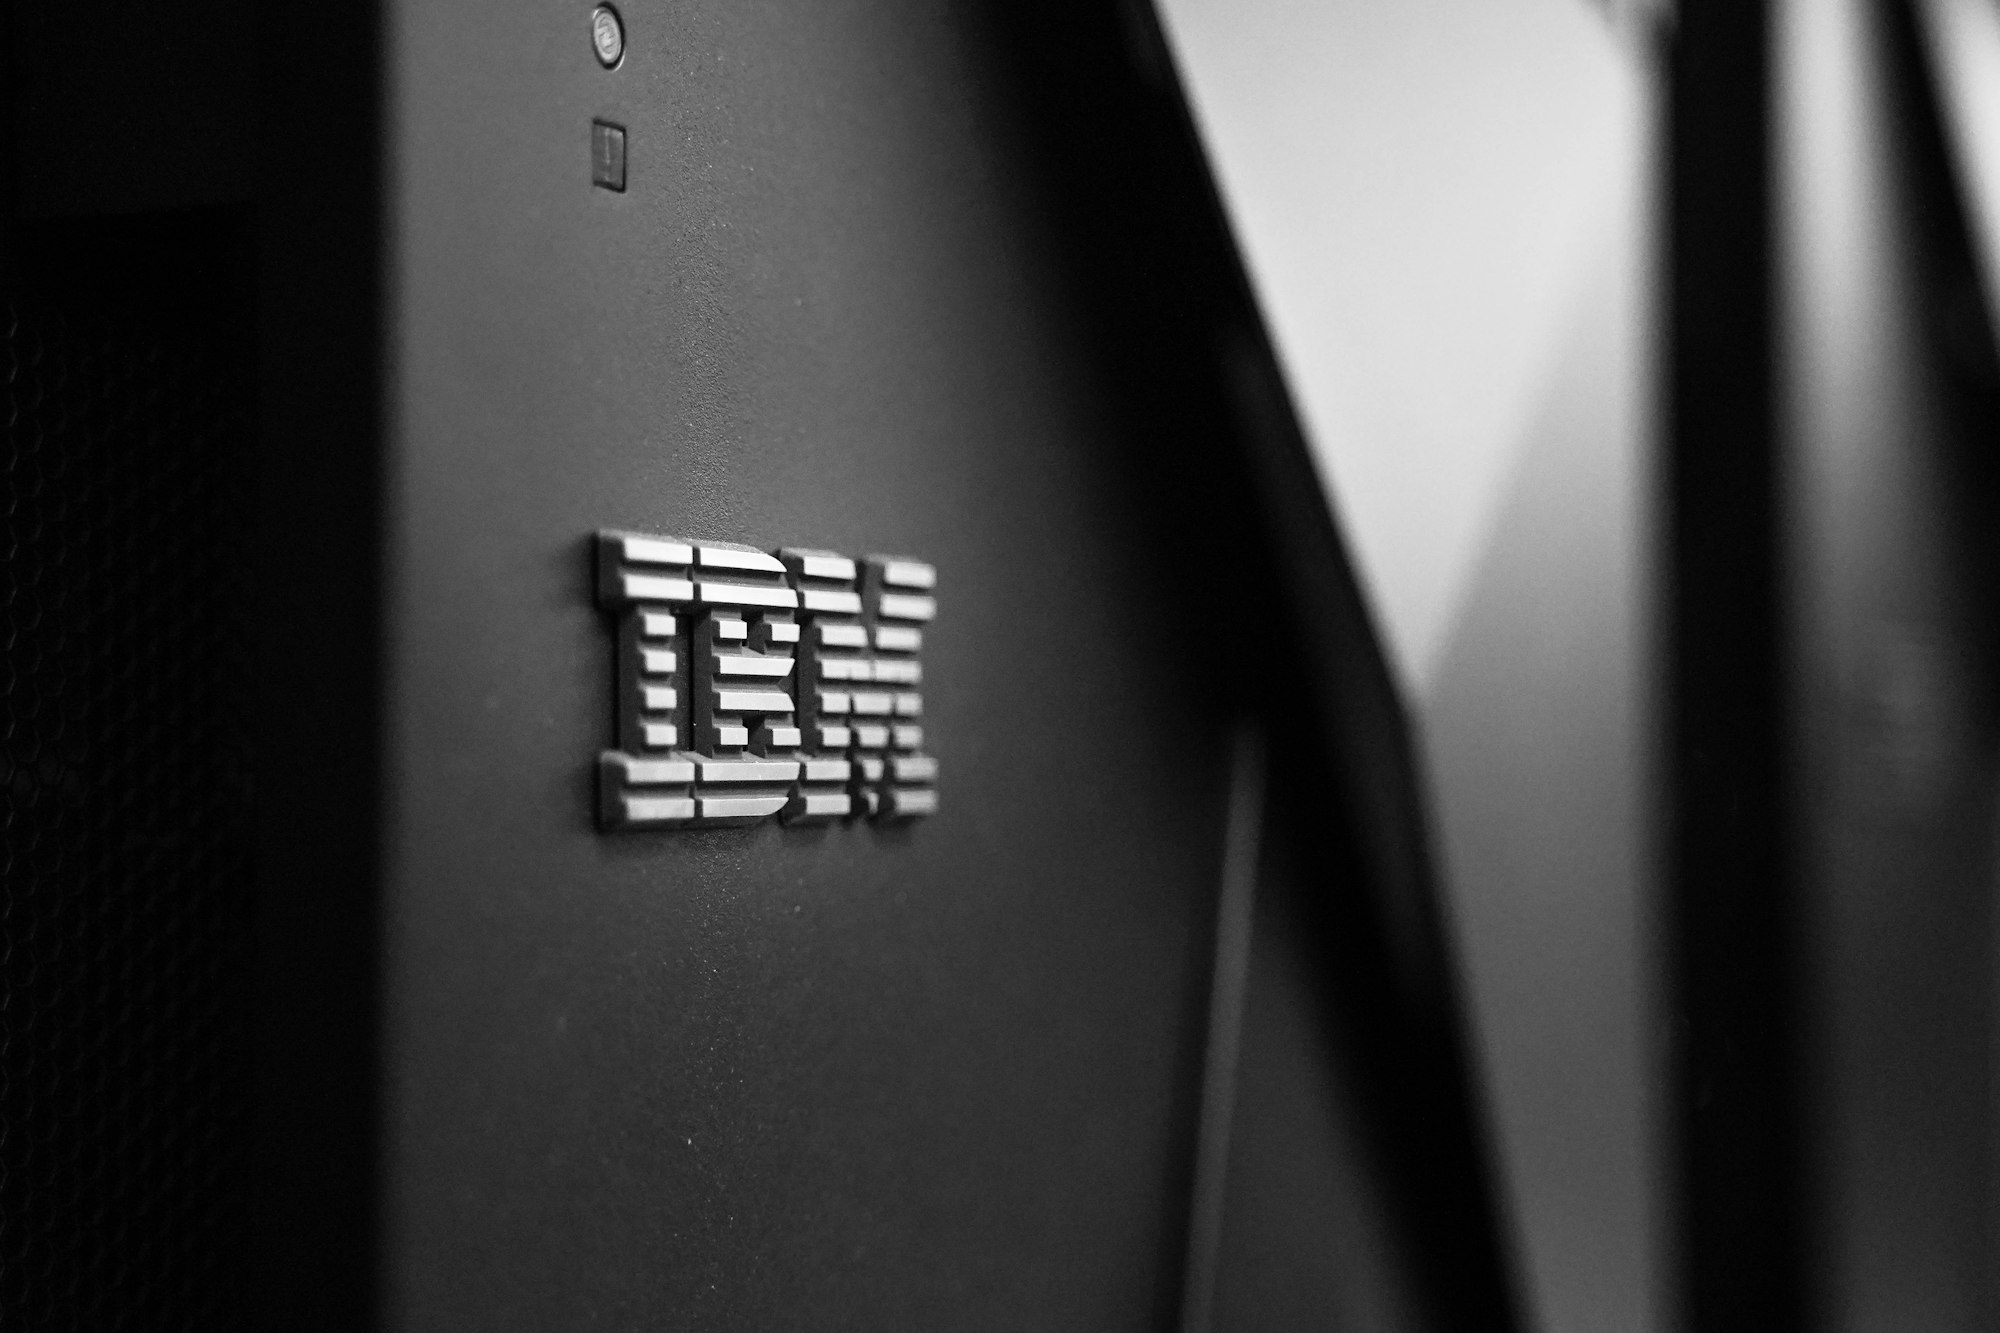 IBM, the Holocaust and the hacker